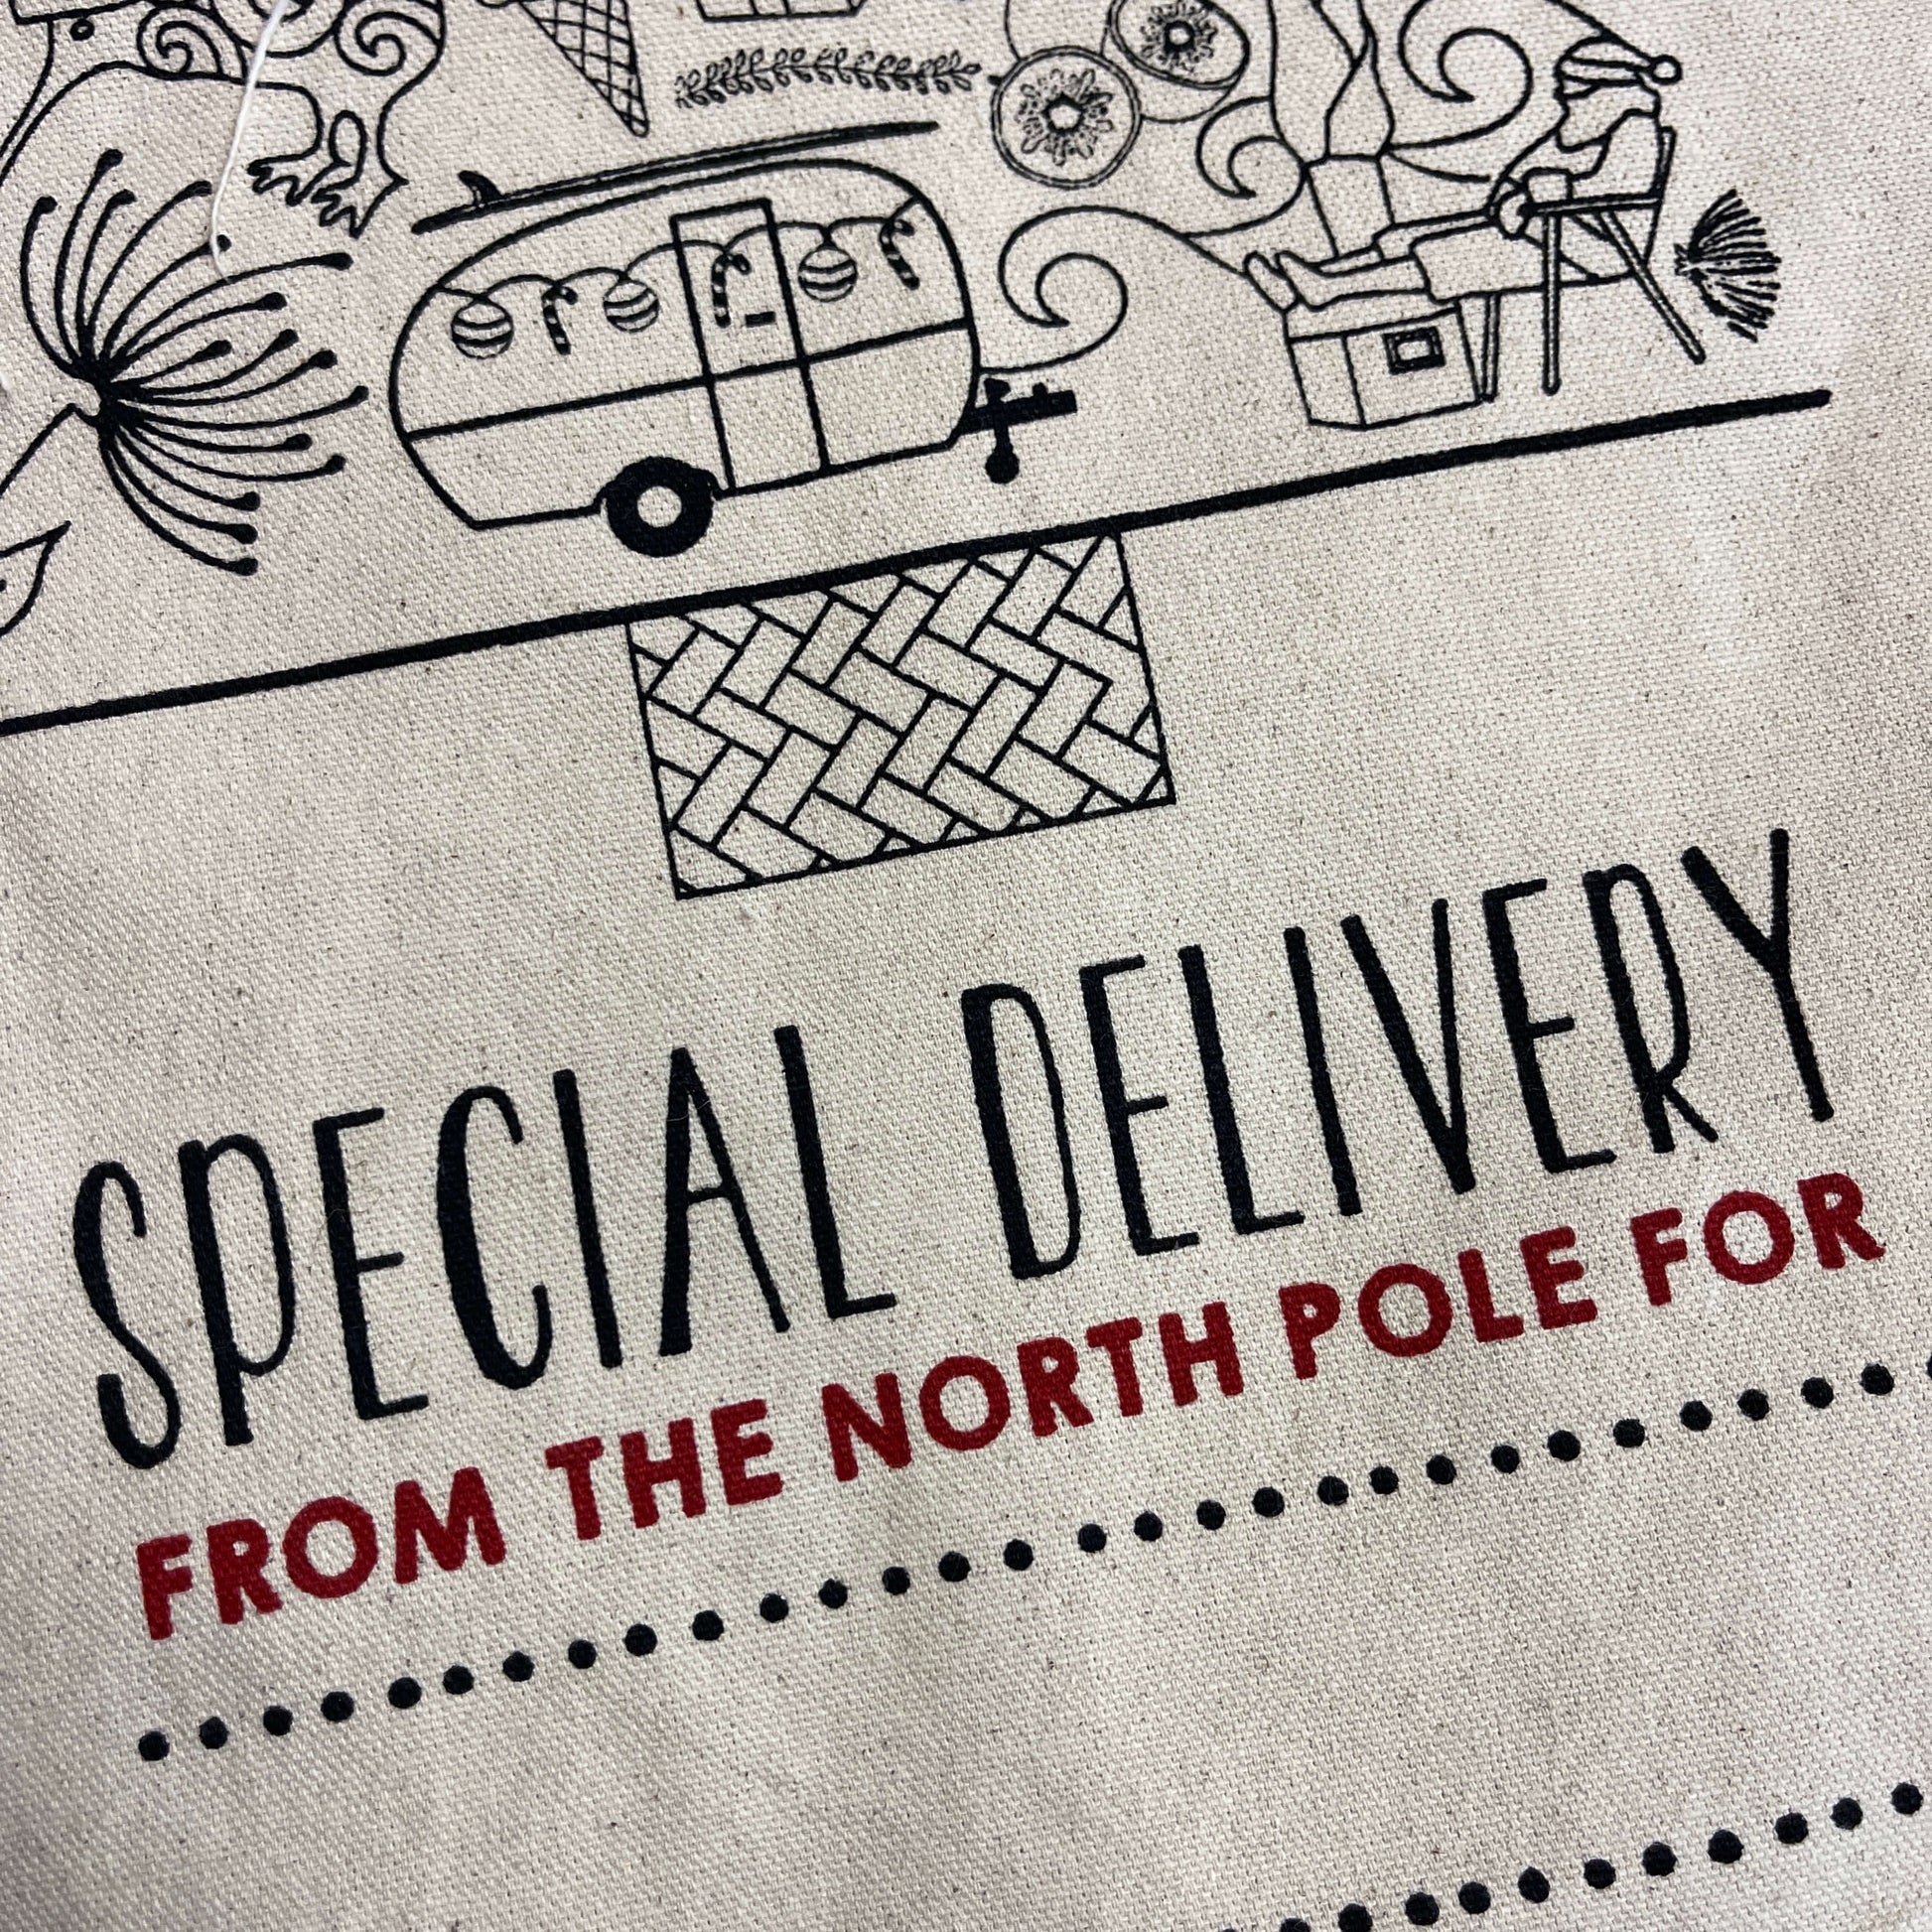 Christmas sack with print saying "Special Delivery from the North Pole for"